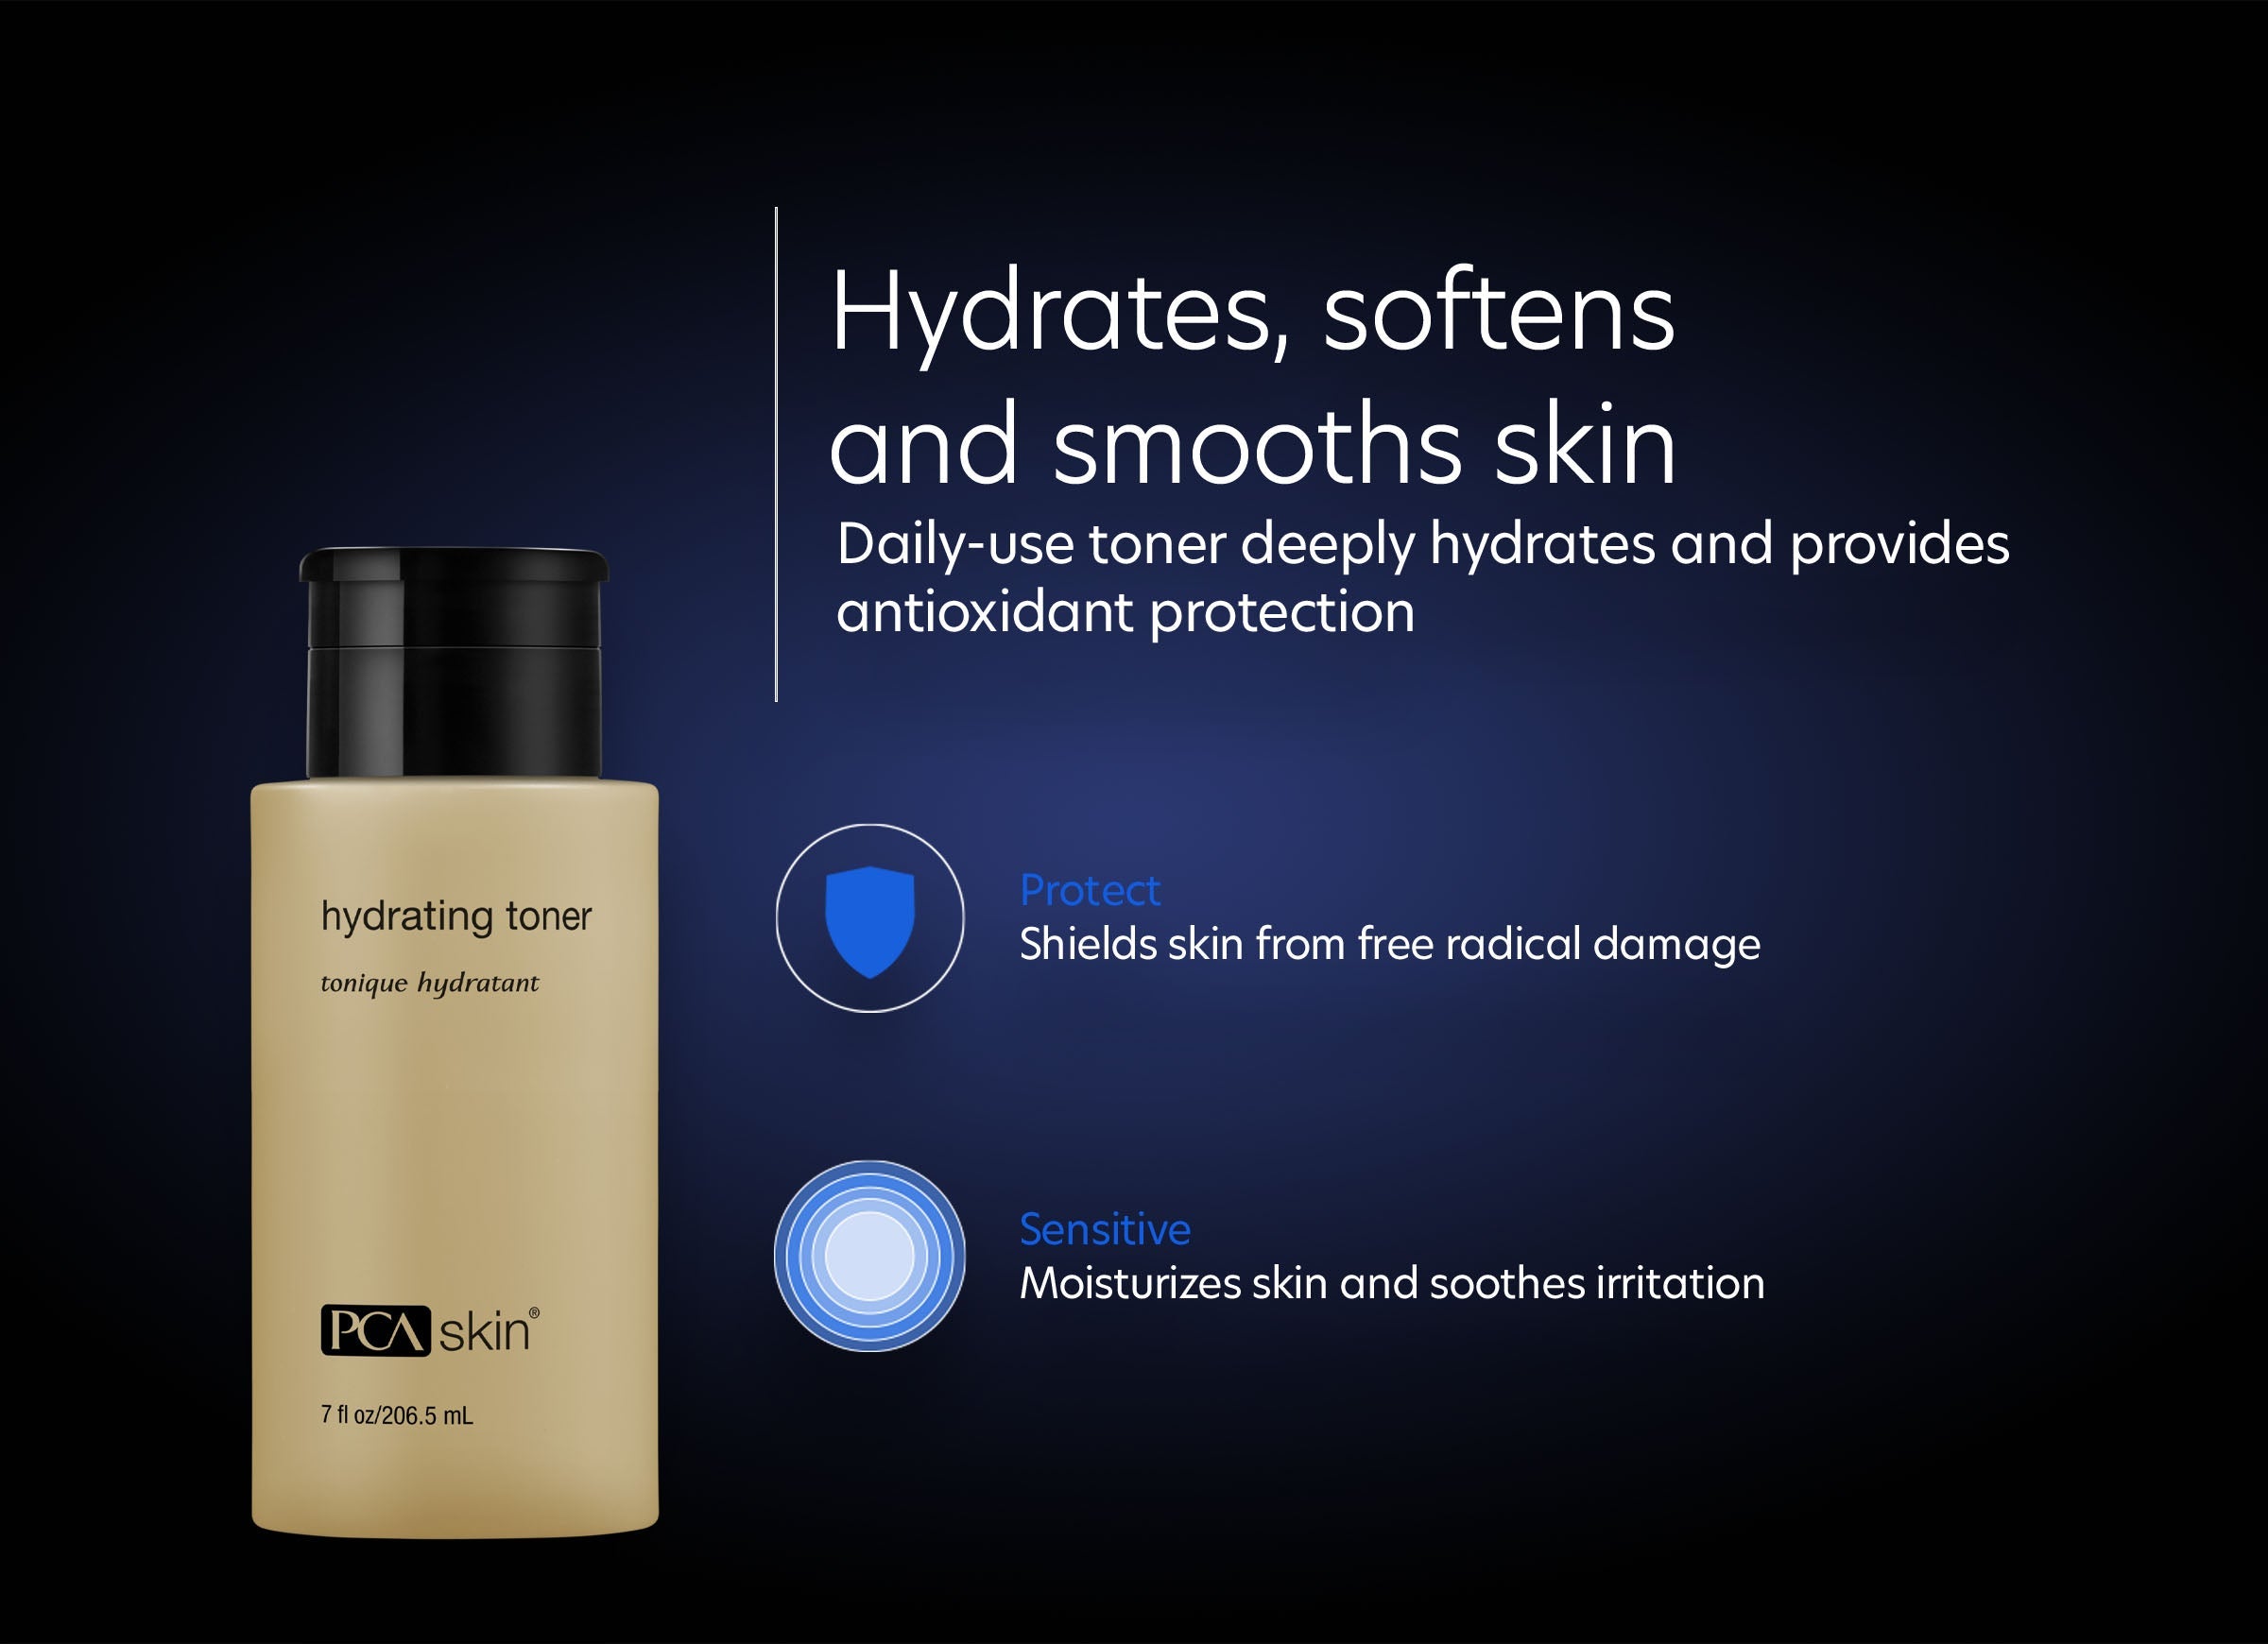 Hydrating Toner - Hydrates, softens and smooths skin. Daily-use deeply hydrates and provides antioxidant protection